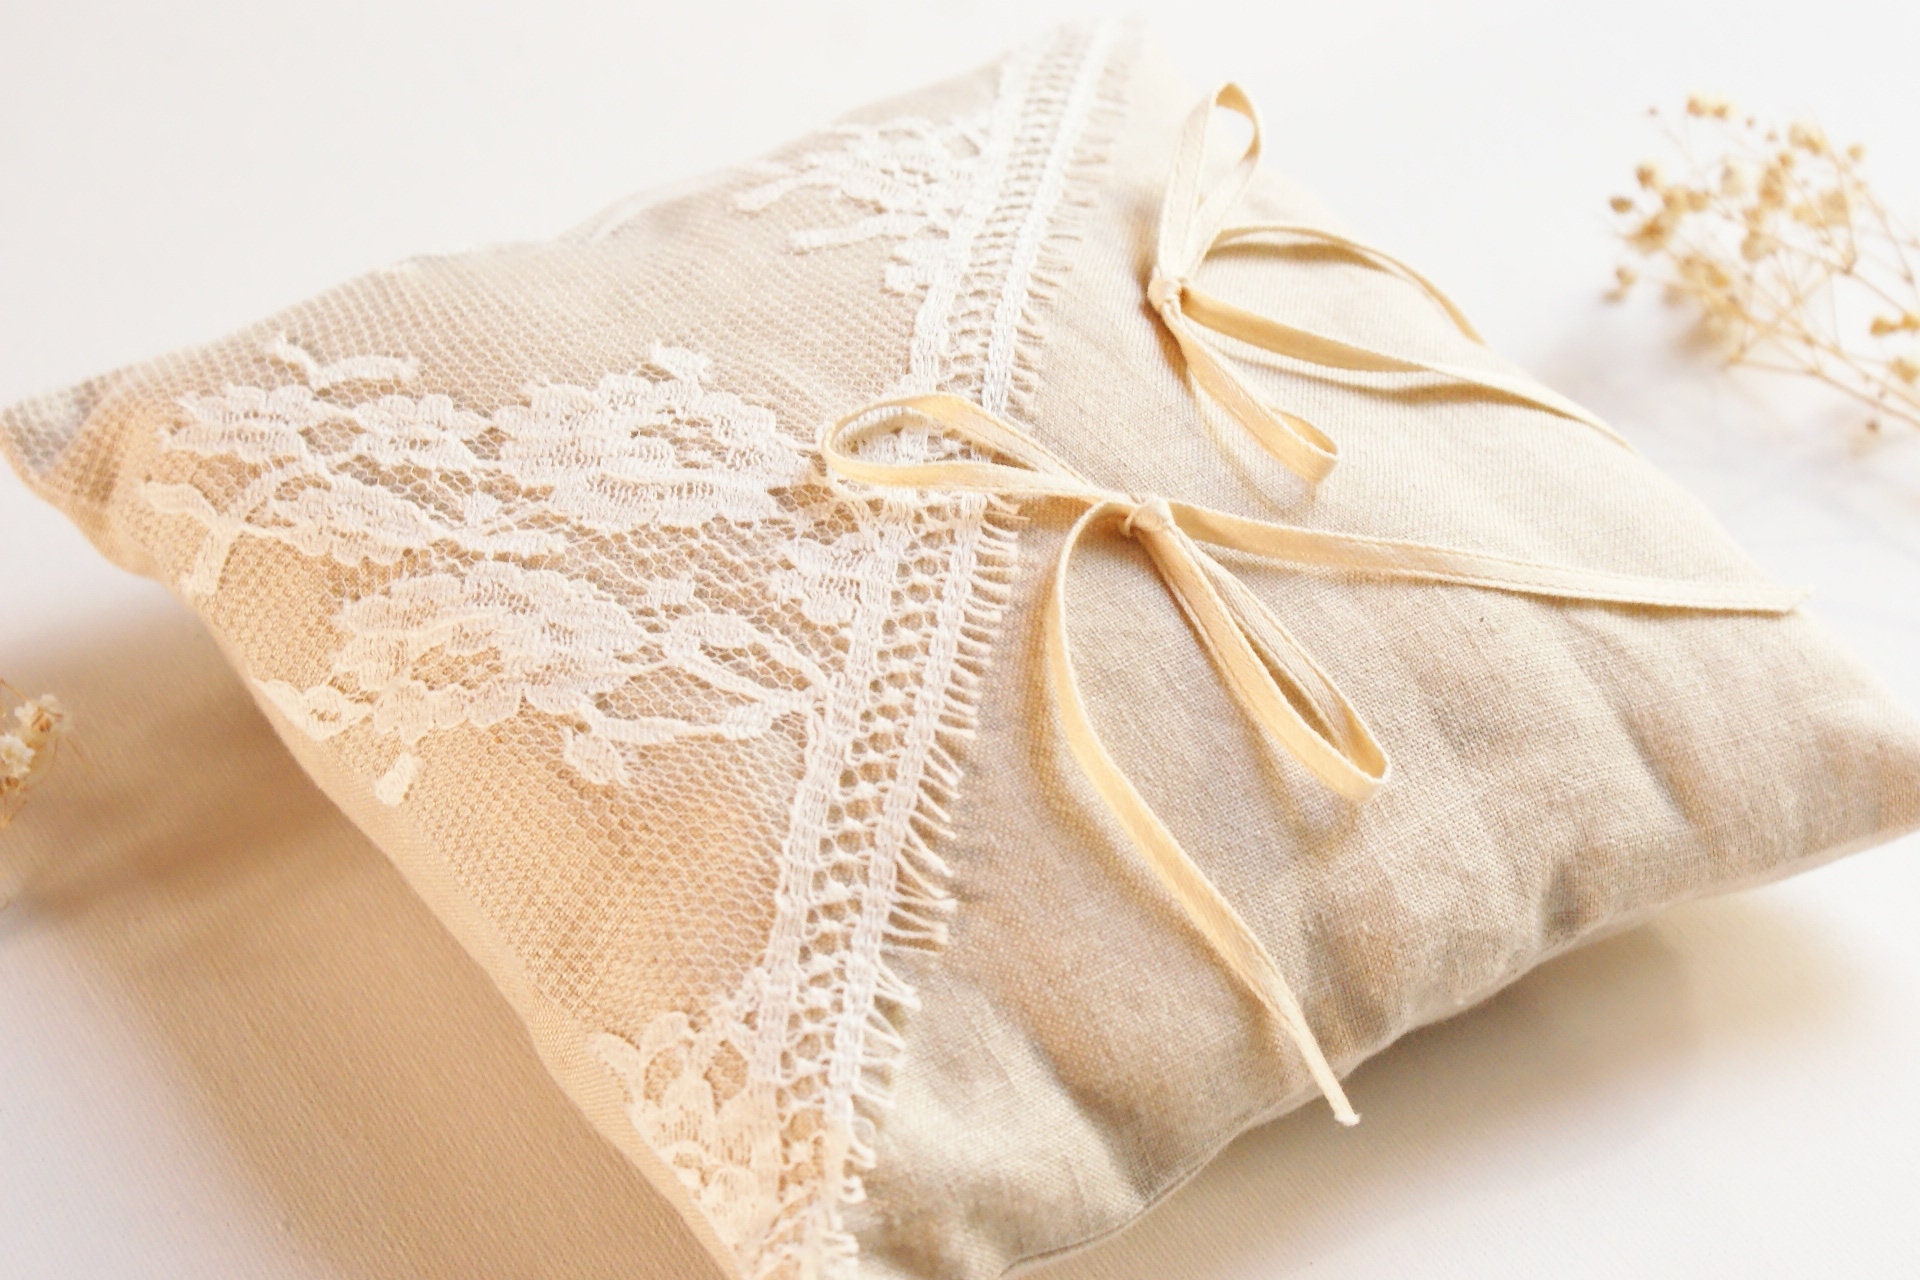 Organic Linen Wedding Cushion From Normandy and Calais Lace - Etsy